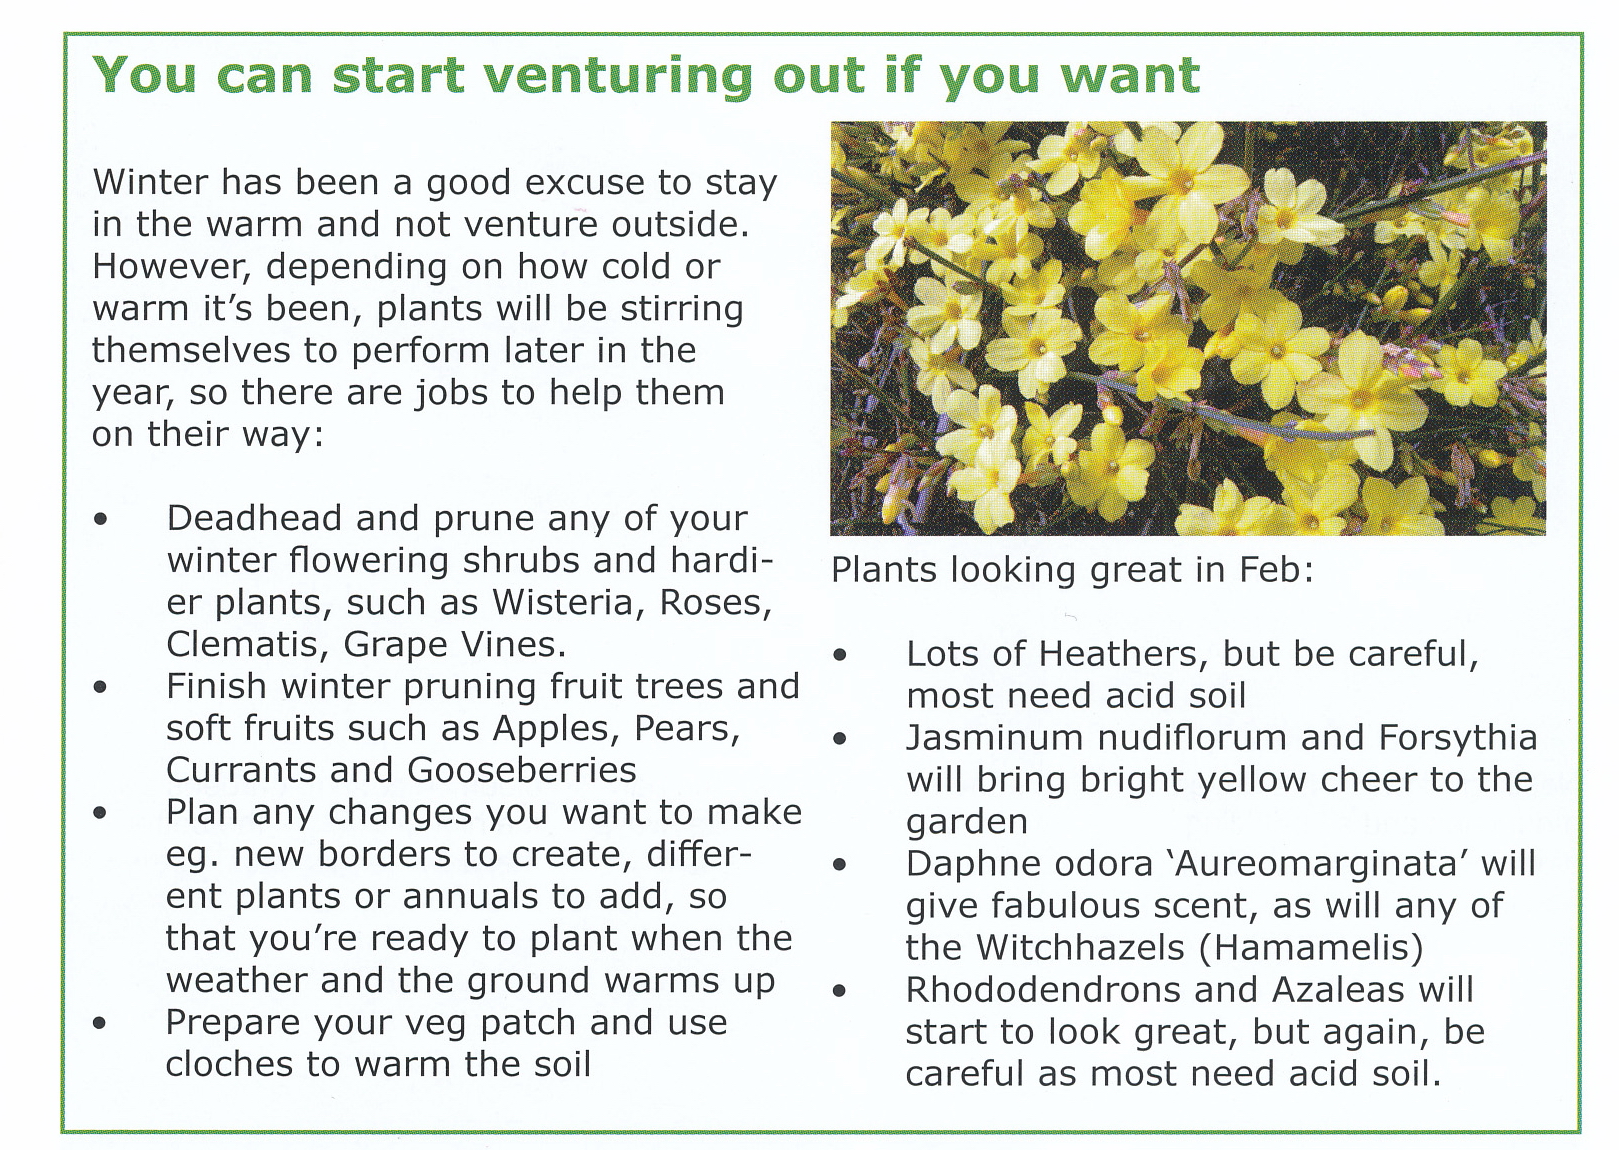 Article about what to do In the Garden in February and plants that look great in February